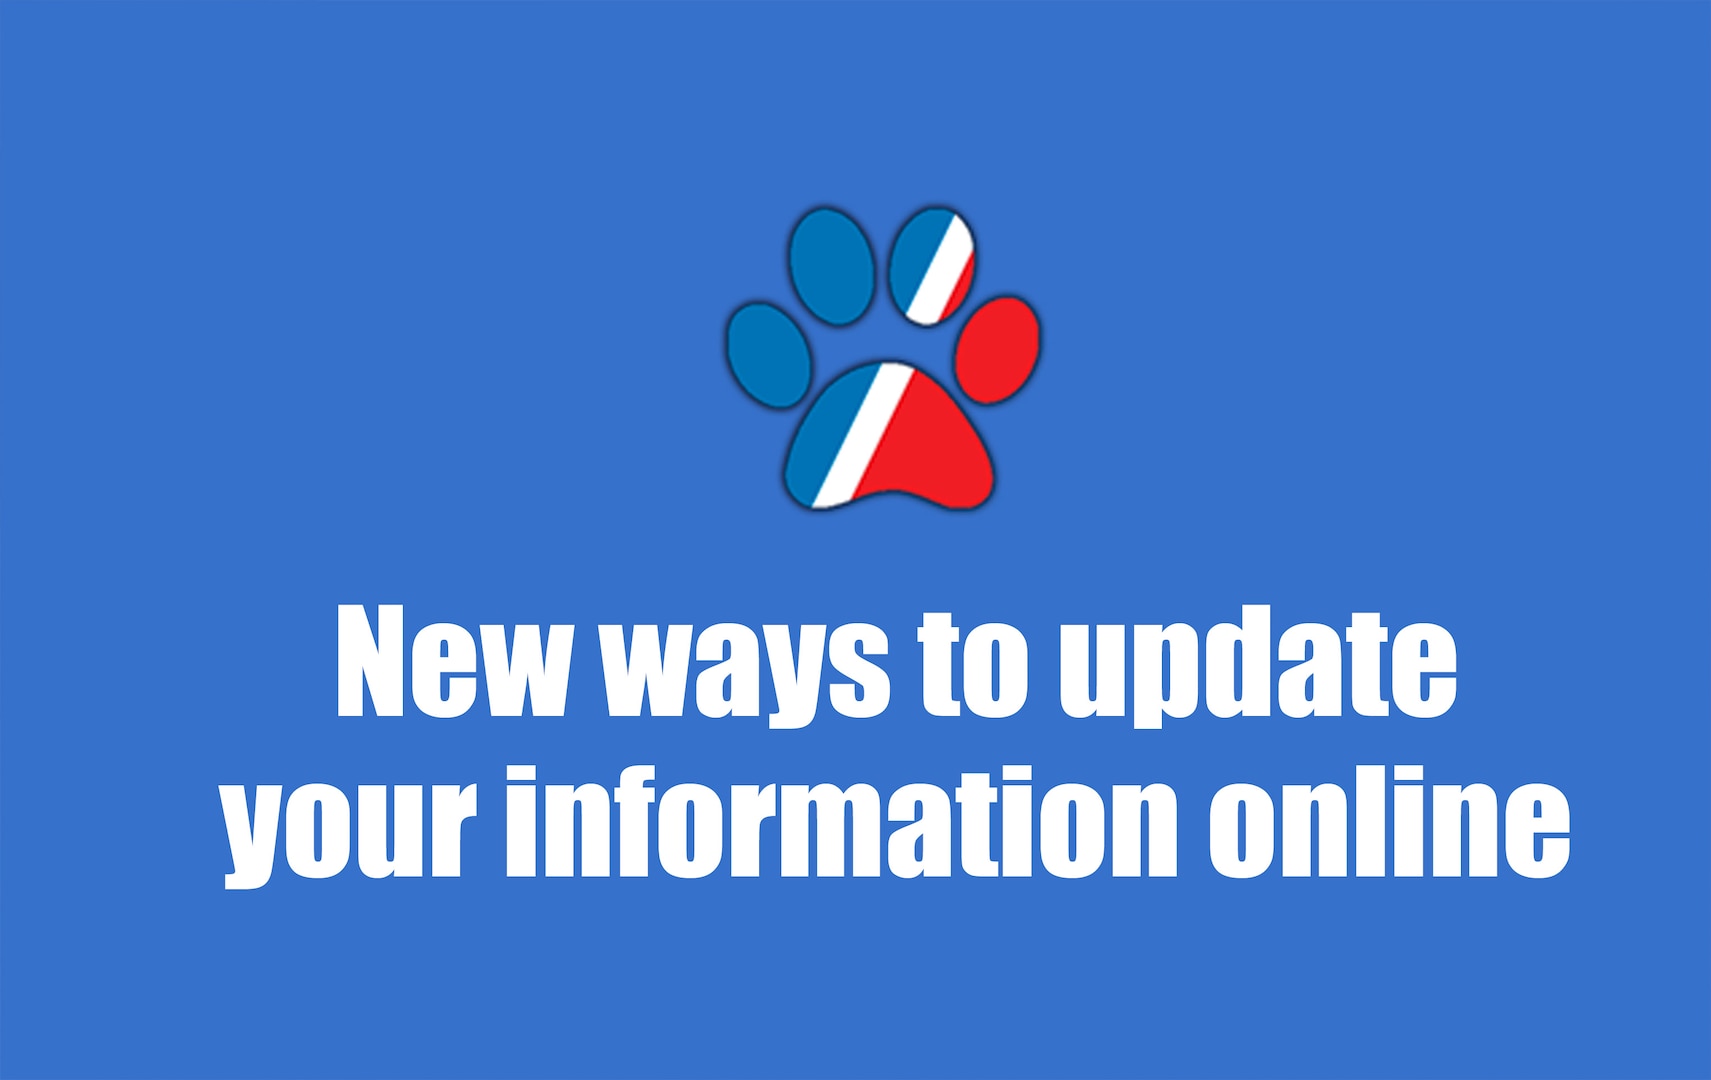 When changing station, manager or address, don’t forget to update your personal information.